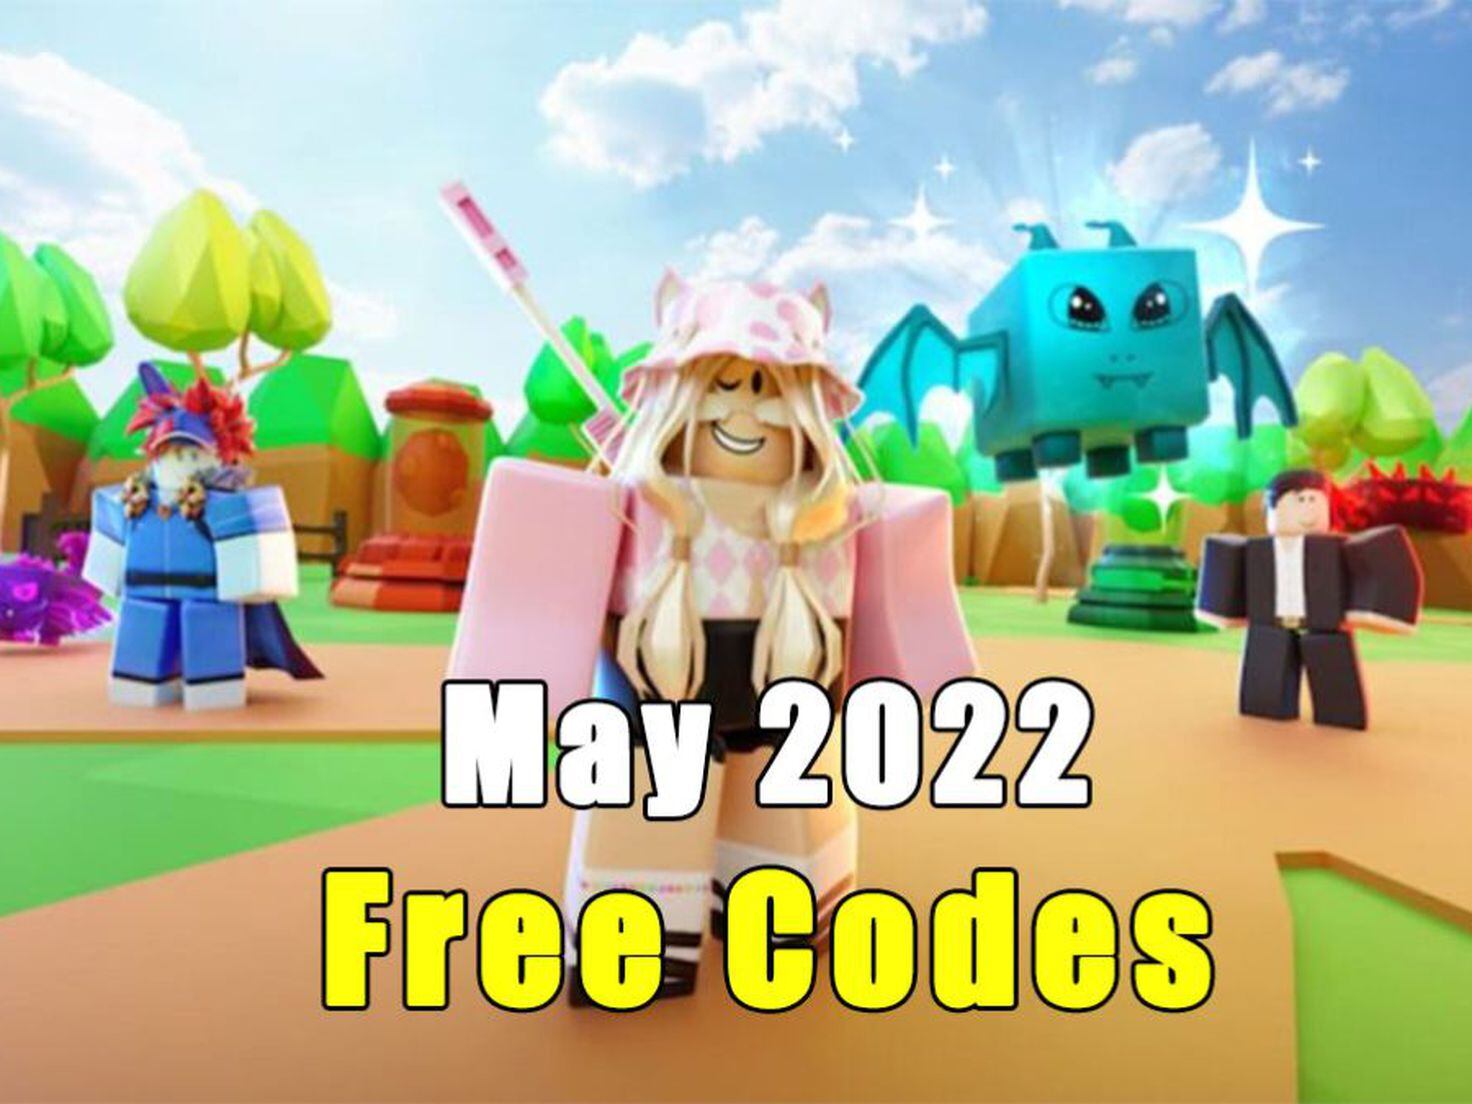 Roblox All Active Redeem Codes May 18